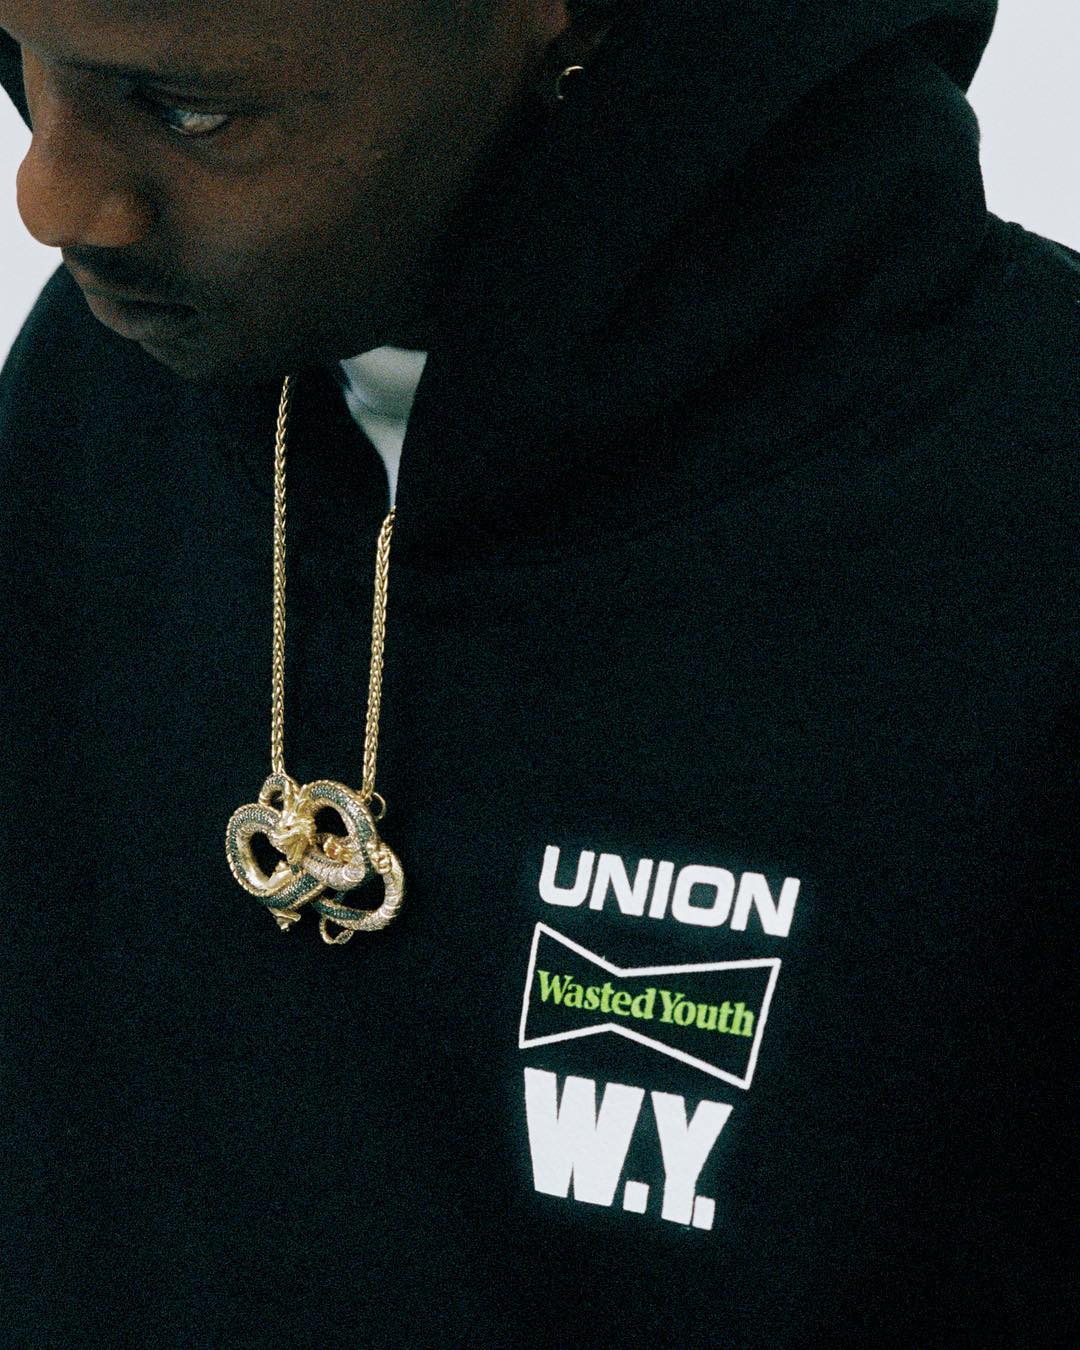 union-wasted-youth-19ss-collaboration-release-20190425